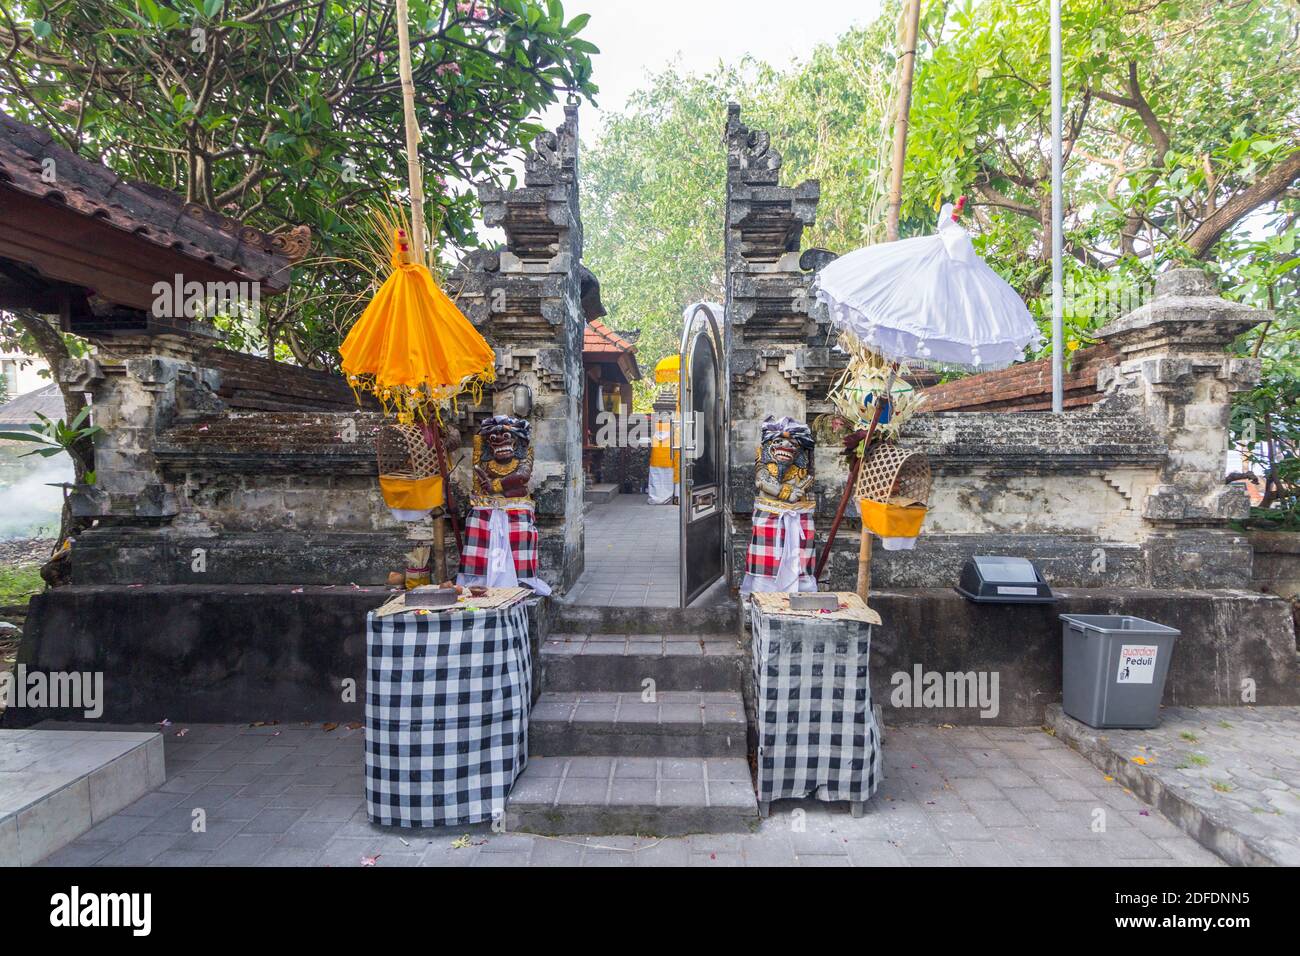 A candi bentar or split gate of a temple in Bali, Indonesia Stock Photo